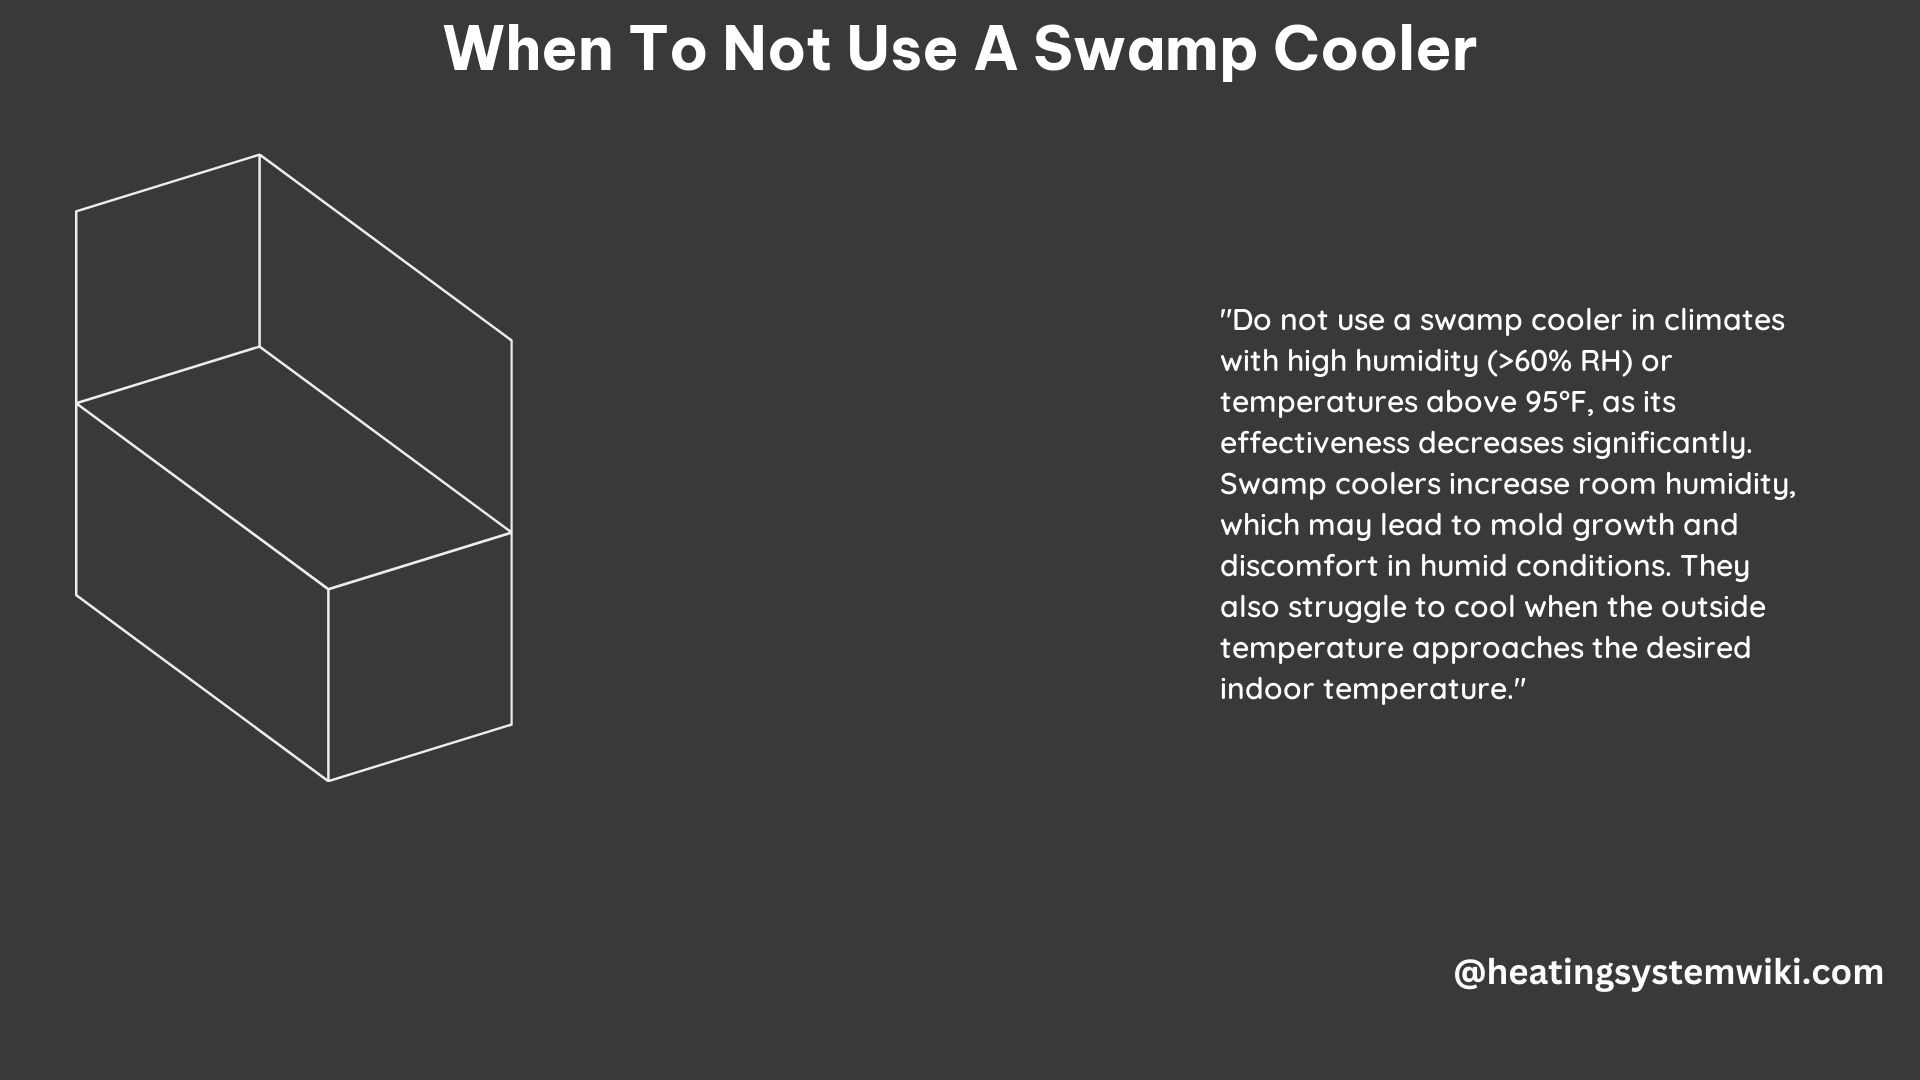 When to Not Use a Swamp Cooler